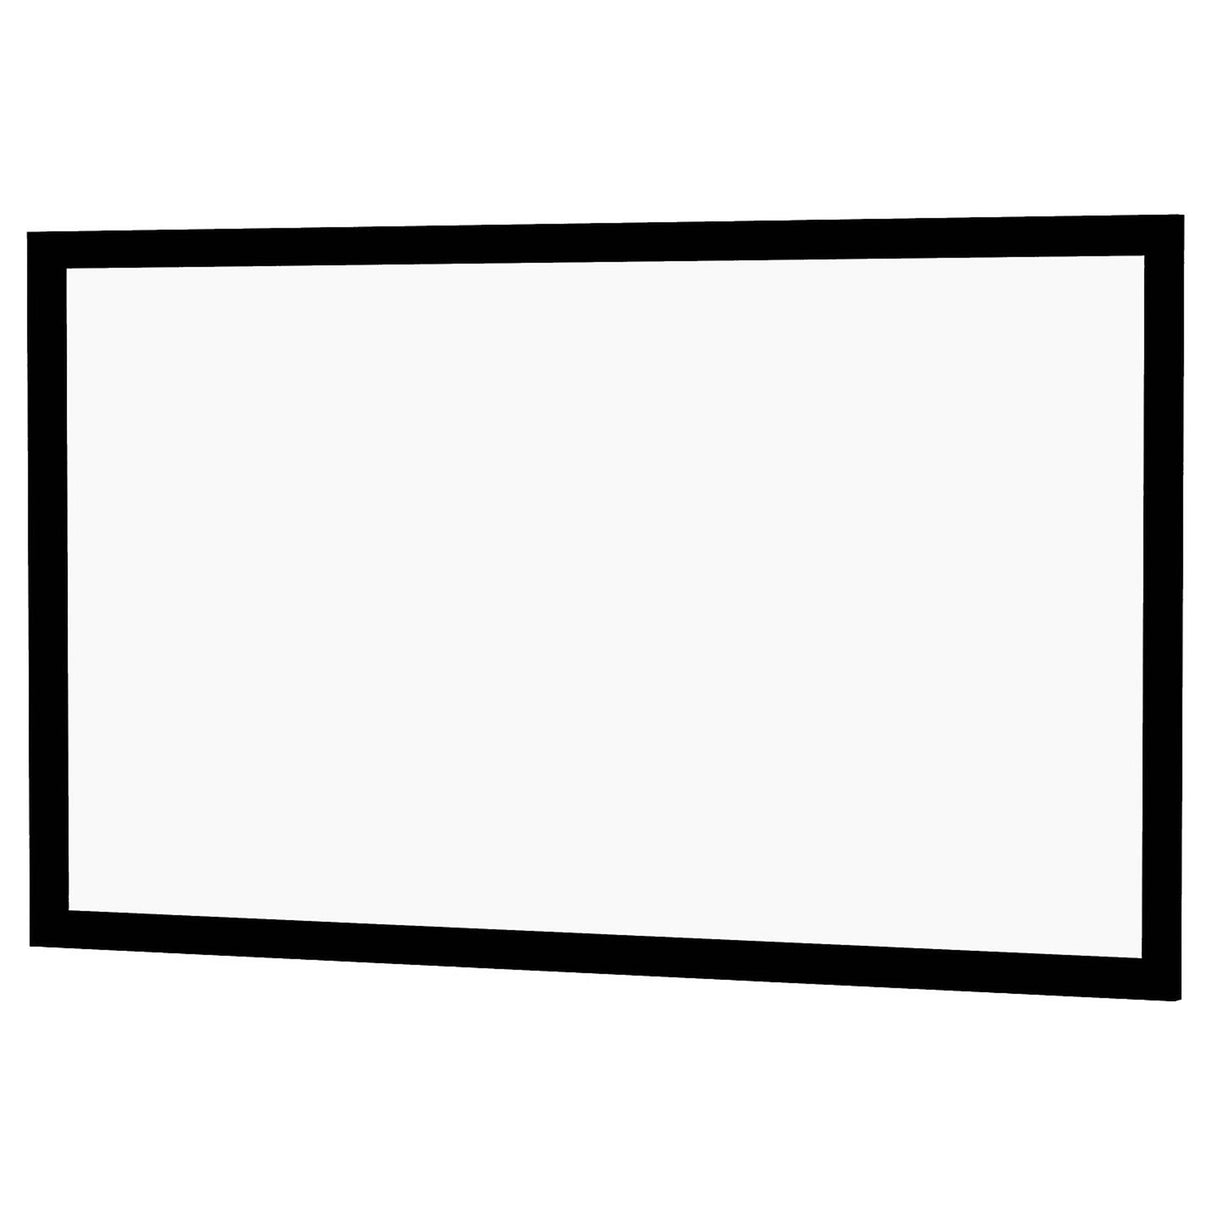 Prime Fixed-frame projector screen with acoustically transparent perforated white fabric (92")